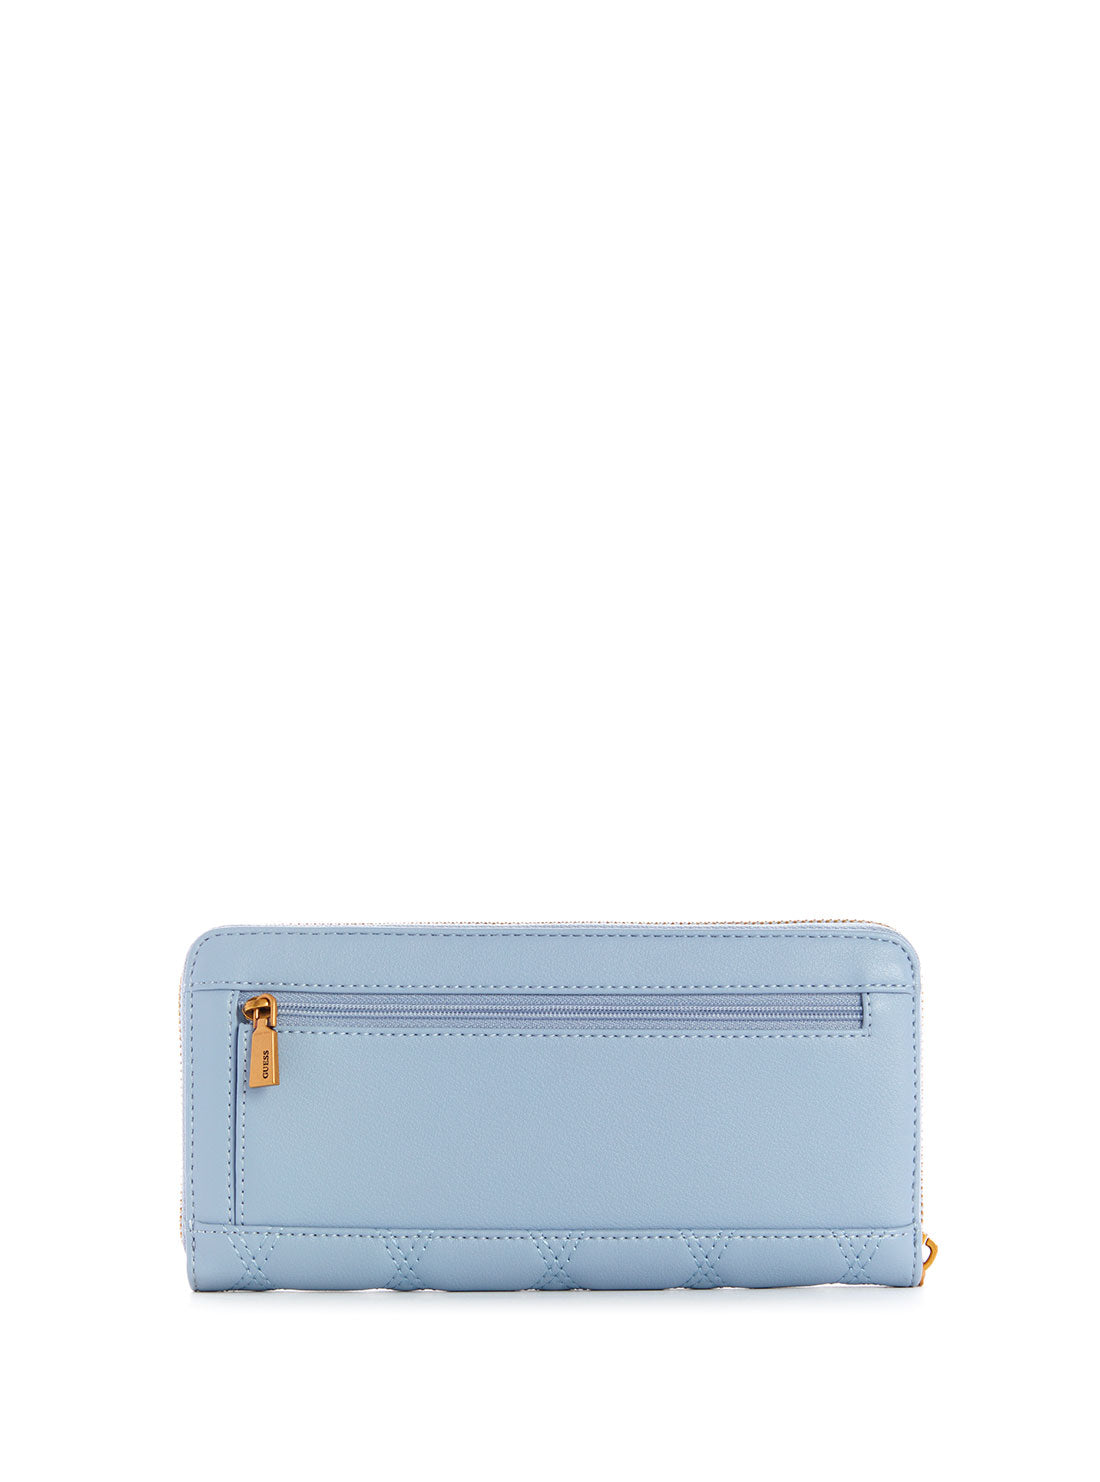 GUESS Womens Blue Triana Large Zip Wallet QS855346 Back View